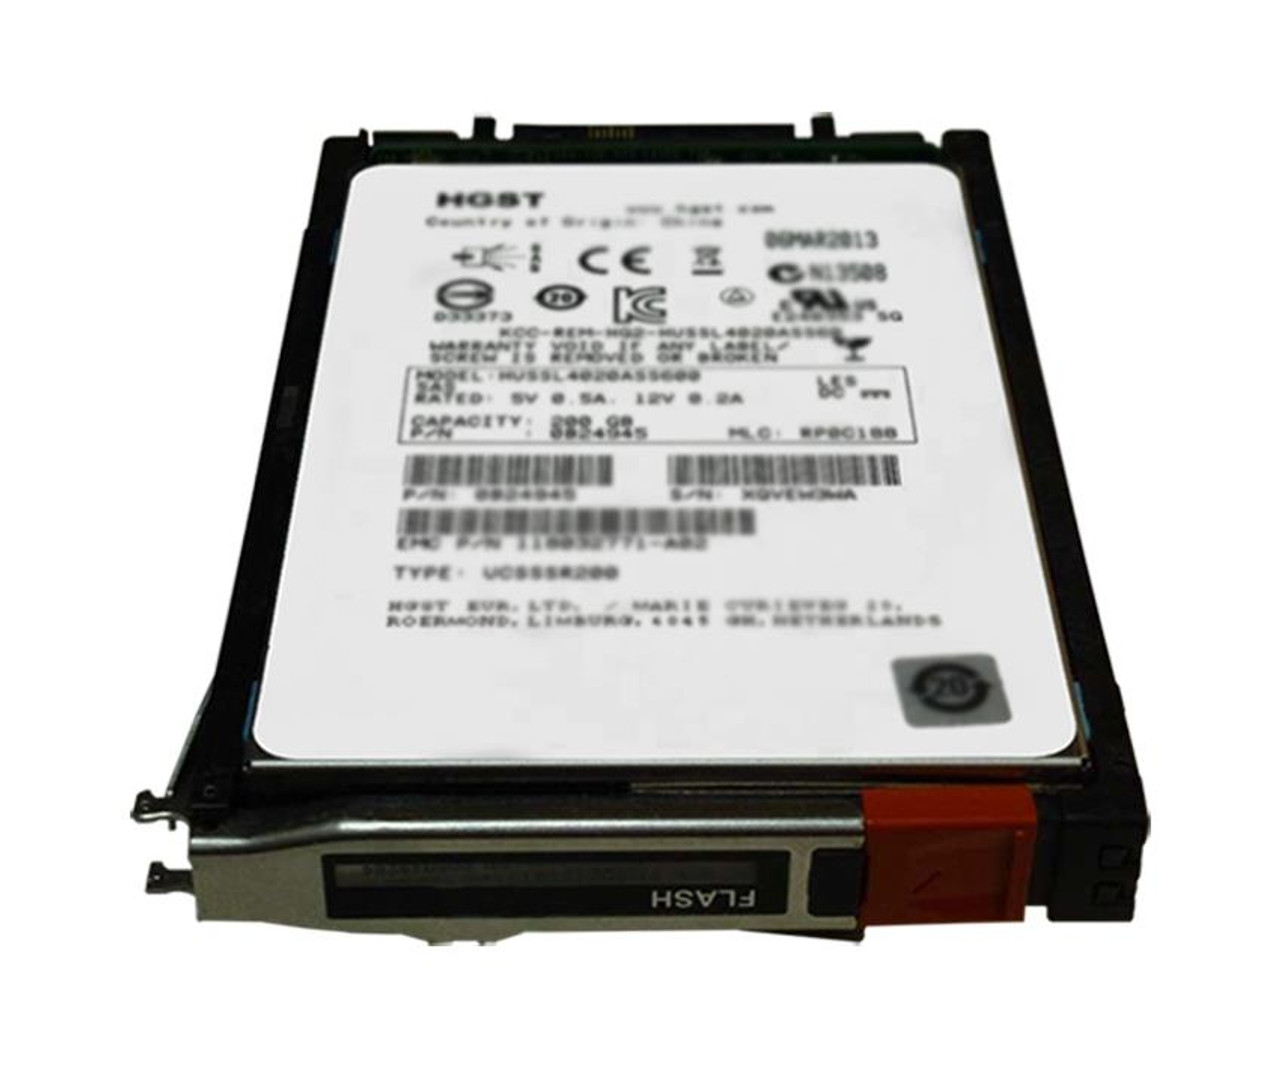 005052221 EMC 800GB SAS 6Gbps EFD 2.5-inch Internal Solid State Drive (SSD) with Tray for VNX5200 5400 5600 5800 7600 8000 Storage Systems